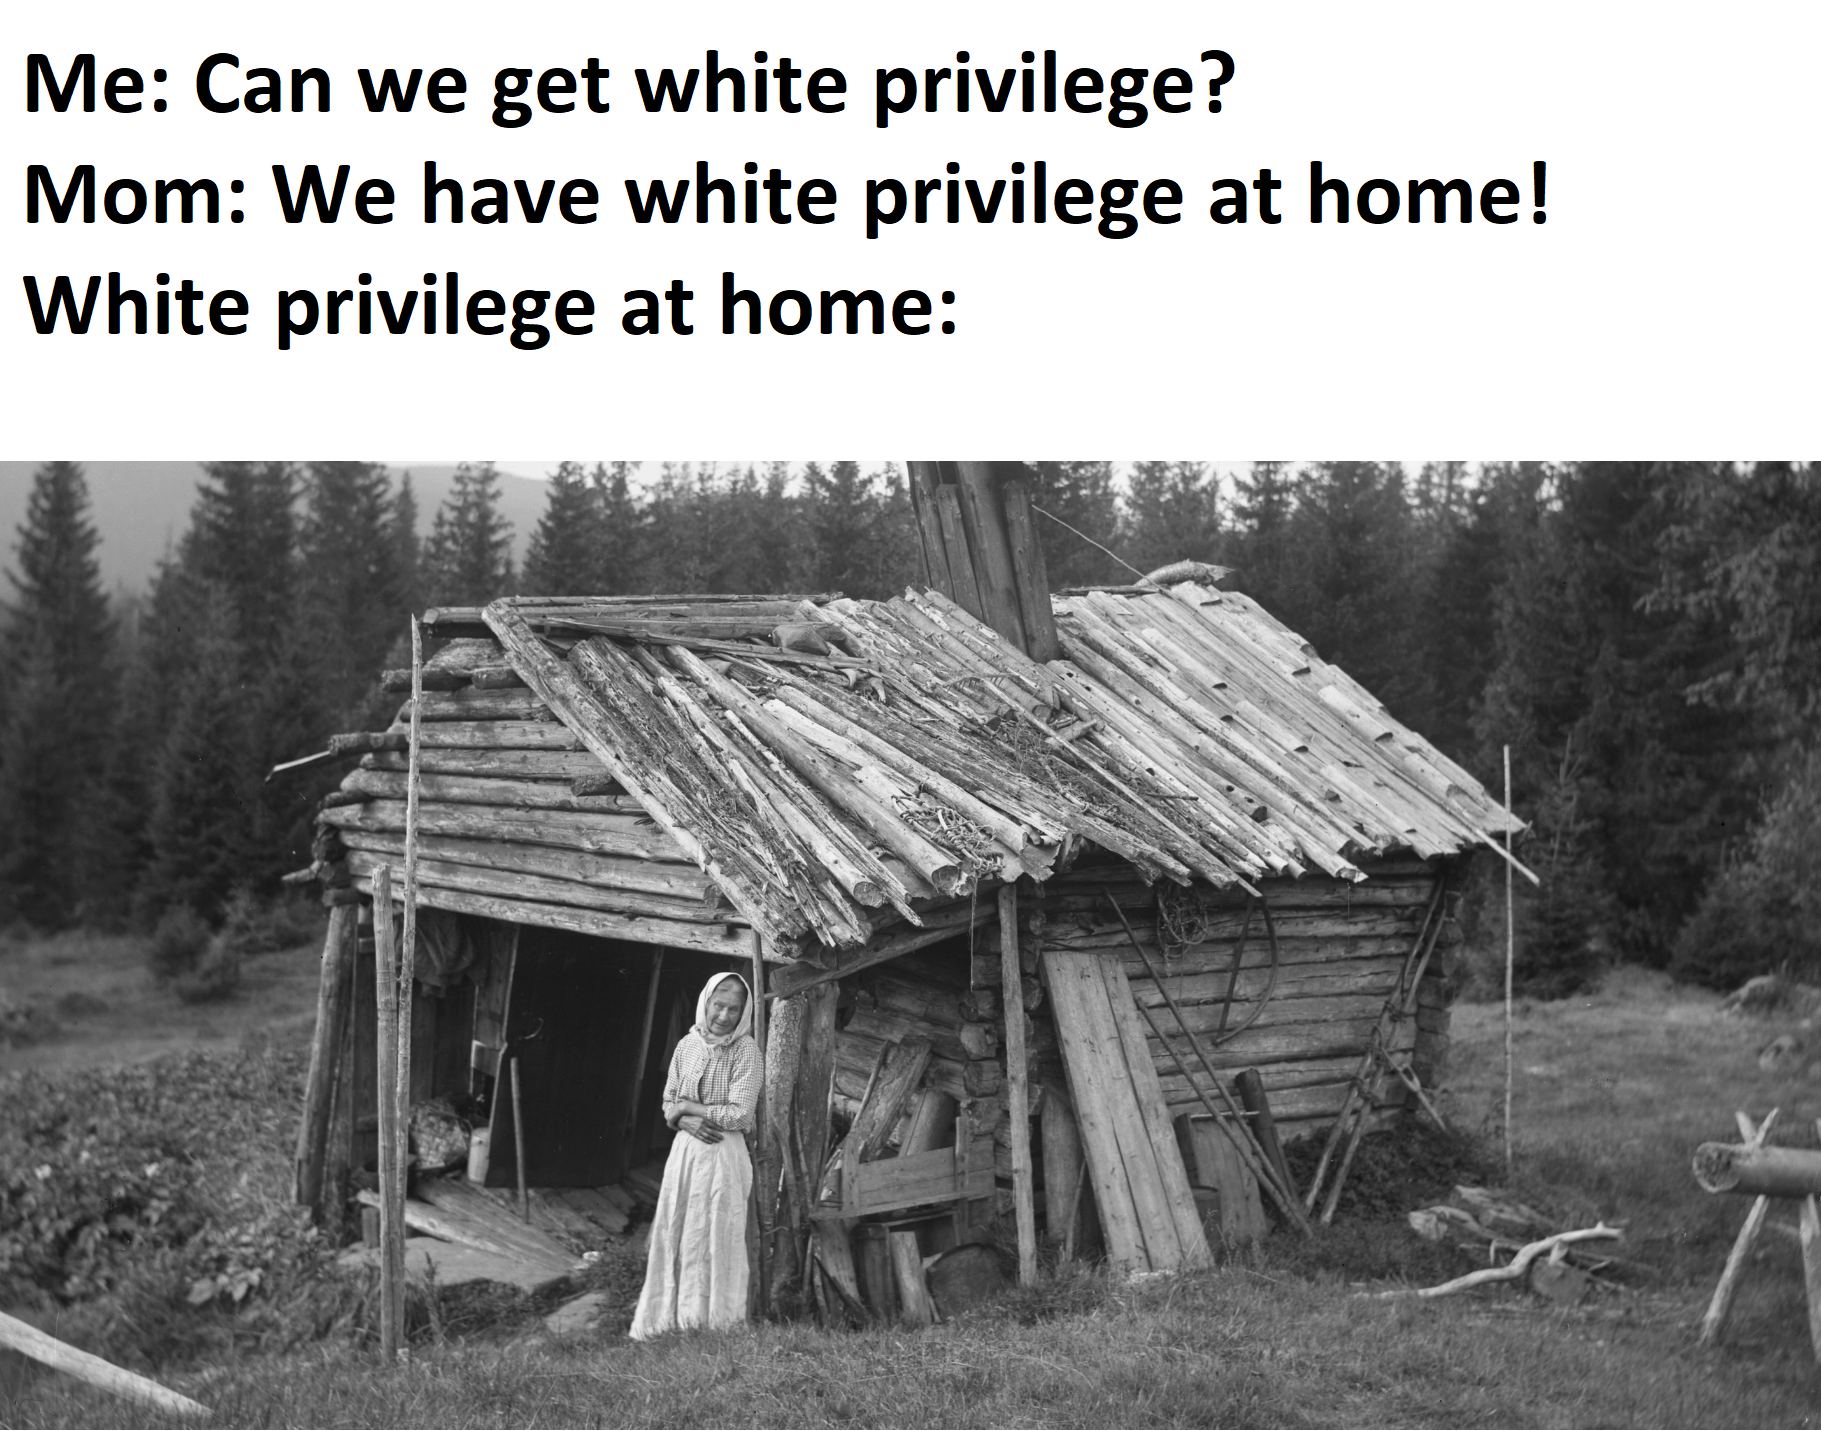 My reaction as a Swede when other Swedes start talking about "white privilege" concerning our history